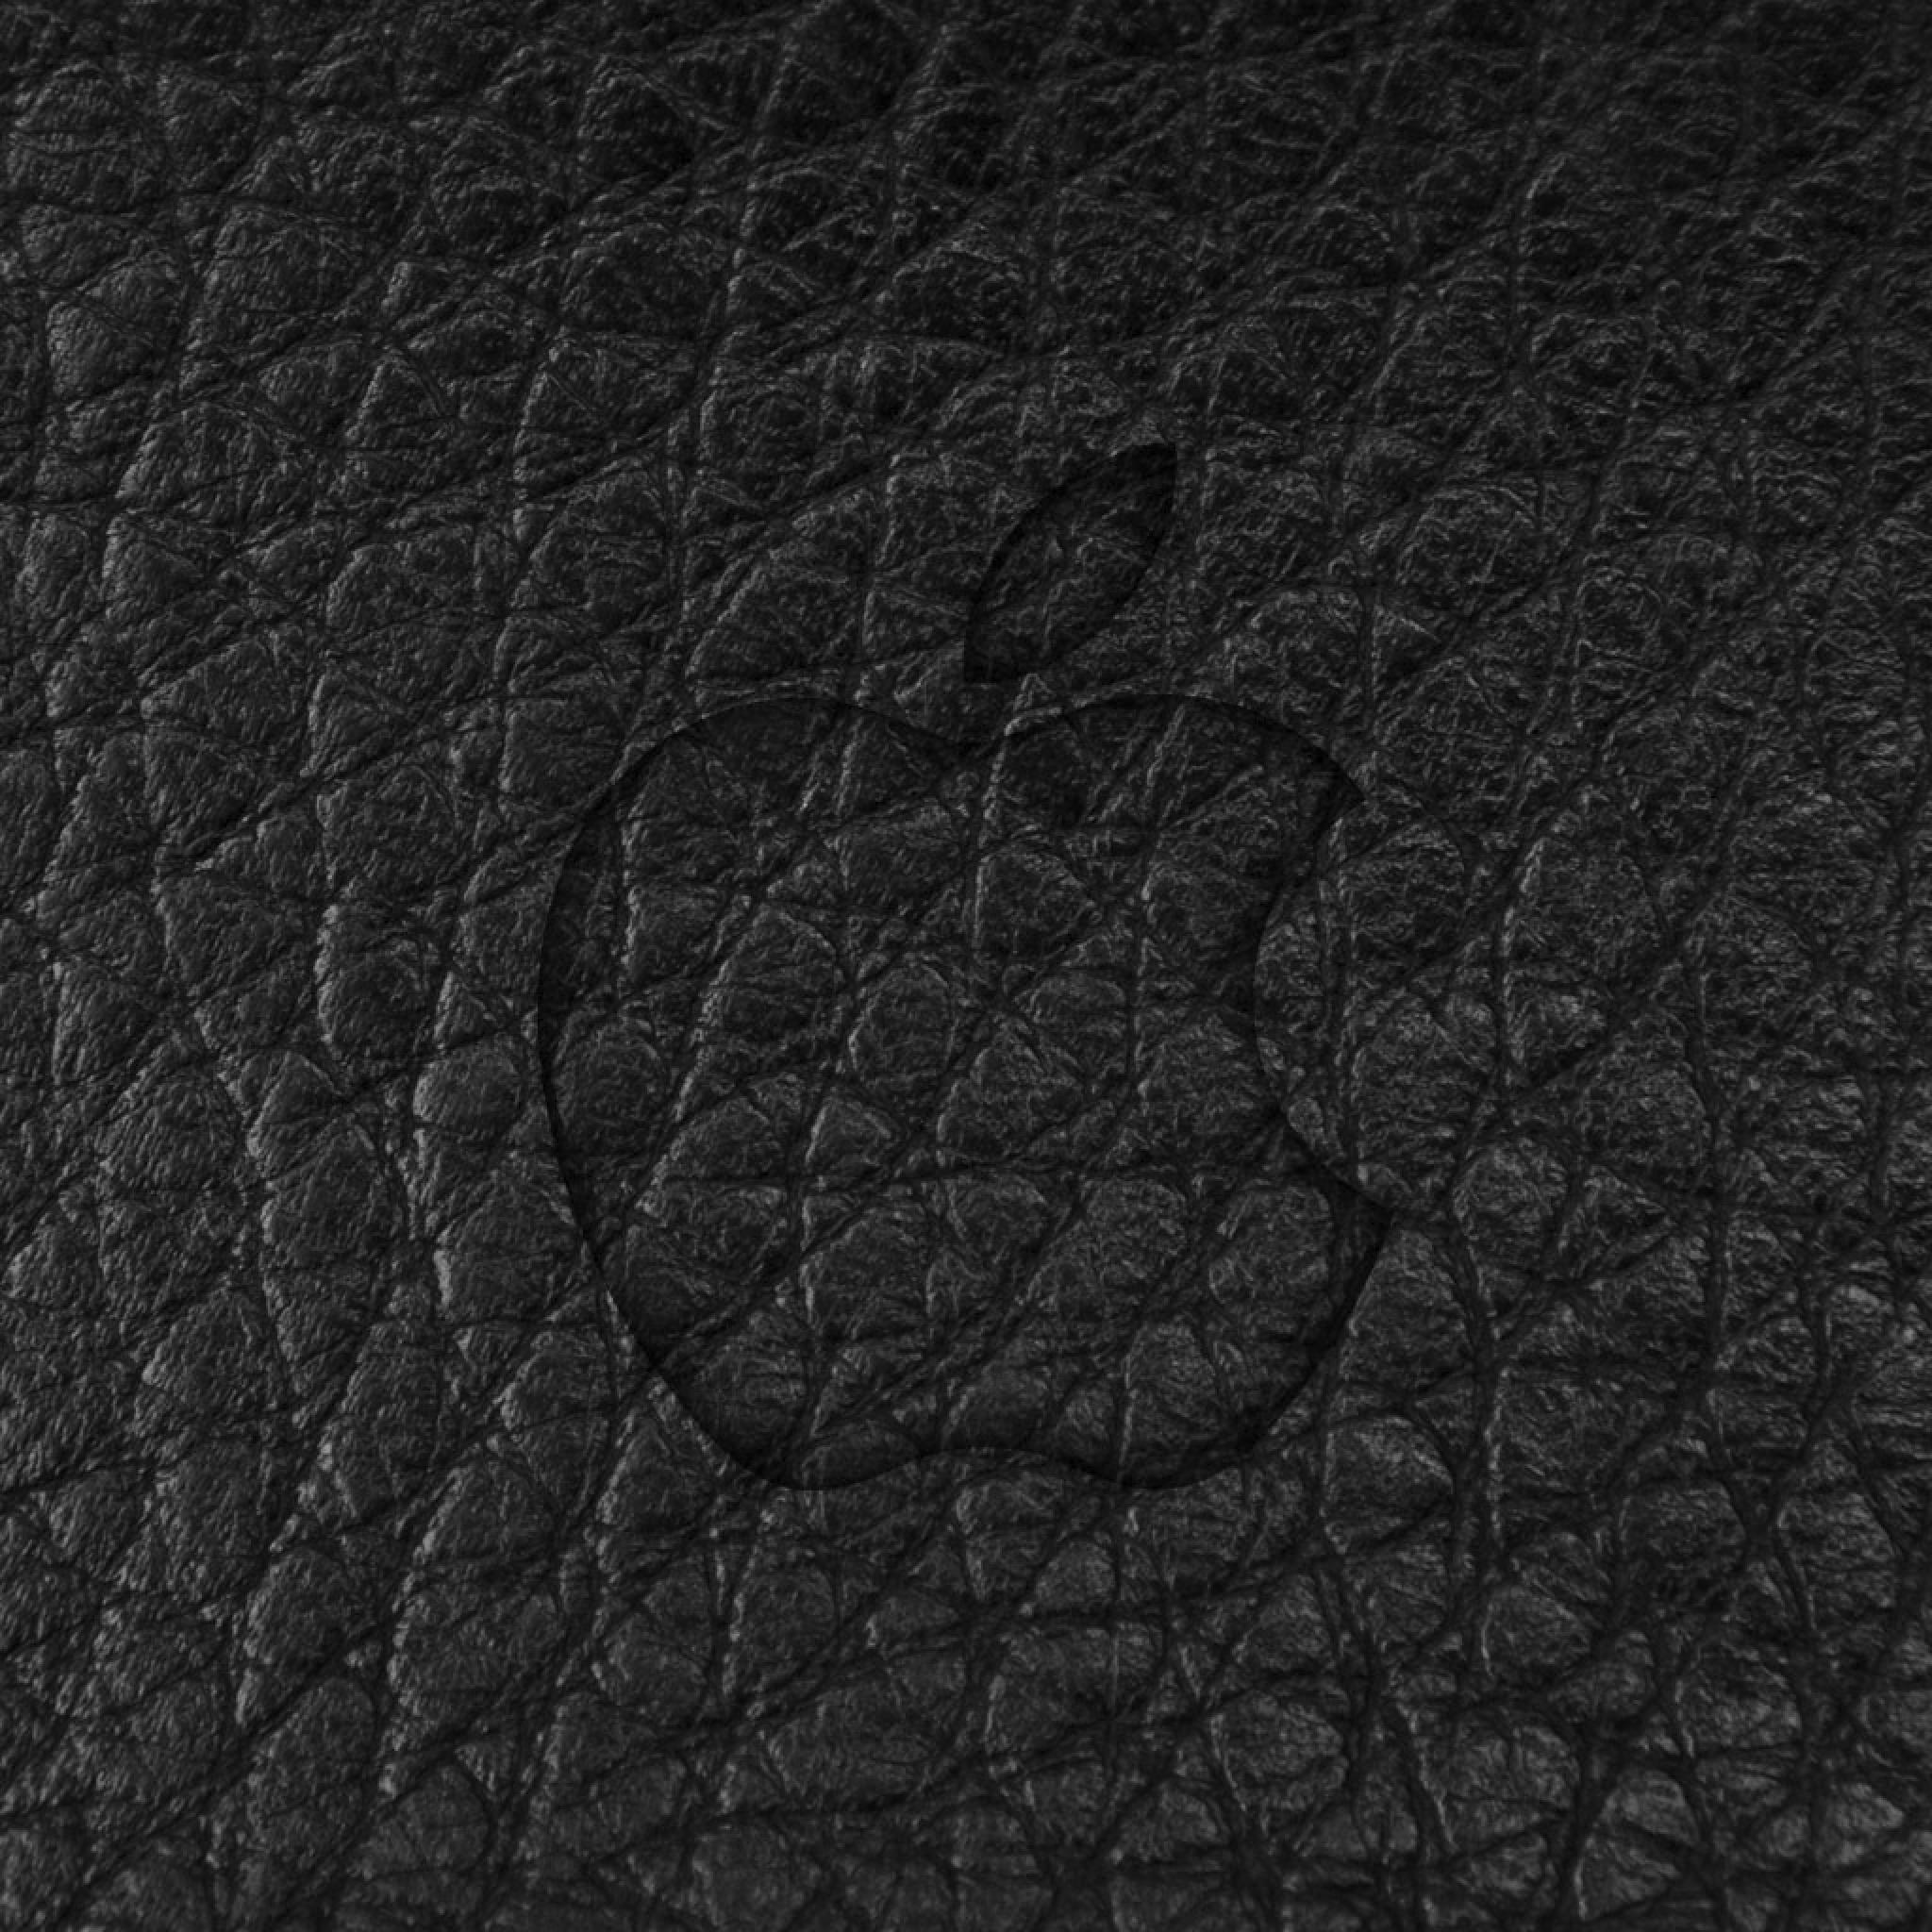 Free Download Computers Studio Leather Apple Logo Ipad Iphone Hd 48x48 For Your Desktop Mobile Tablet Explore 74 Leather Apple Wallpaper Black Leather Wallpaper Brown Leather Wallpaper